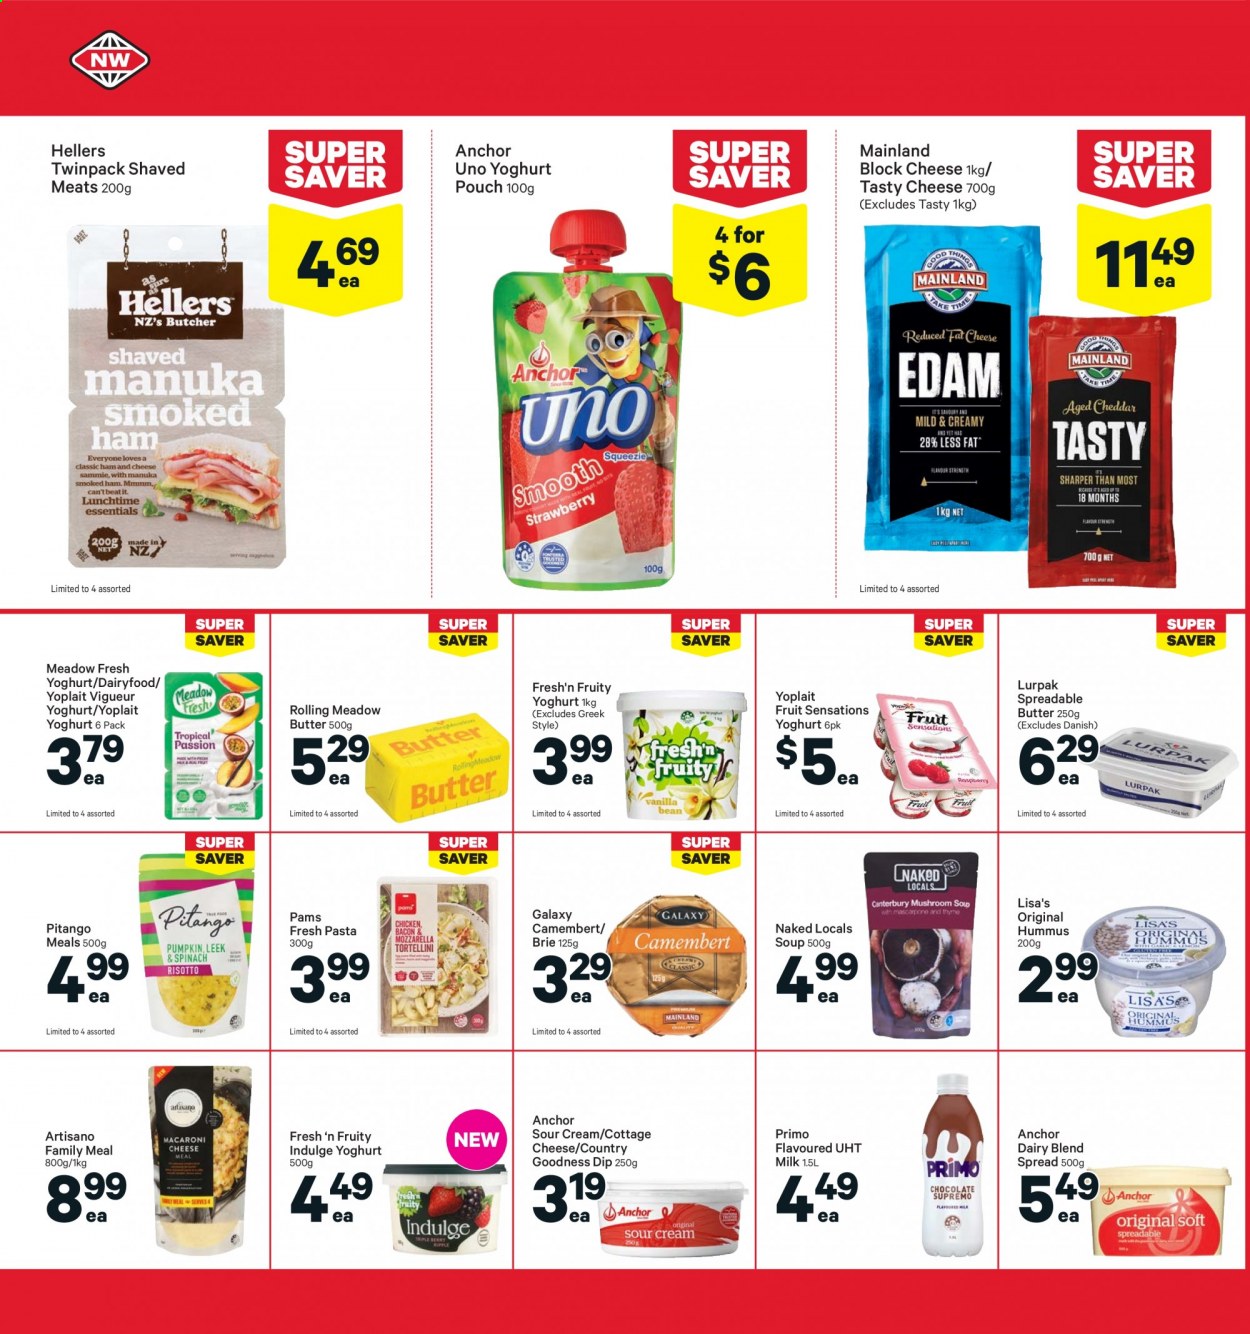 thumbnail - New World mailer - 23.08.2021 - 29.08.2021 - Sales products - soup, hummus, camembert, cottage cheese, cheese, brie, yoghurt, Fresh'n Fruity, Yoplait, milk, dairy blend, butter, Anchor, spreadable butter, sour cream, dip. Page 22.